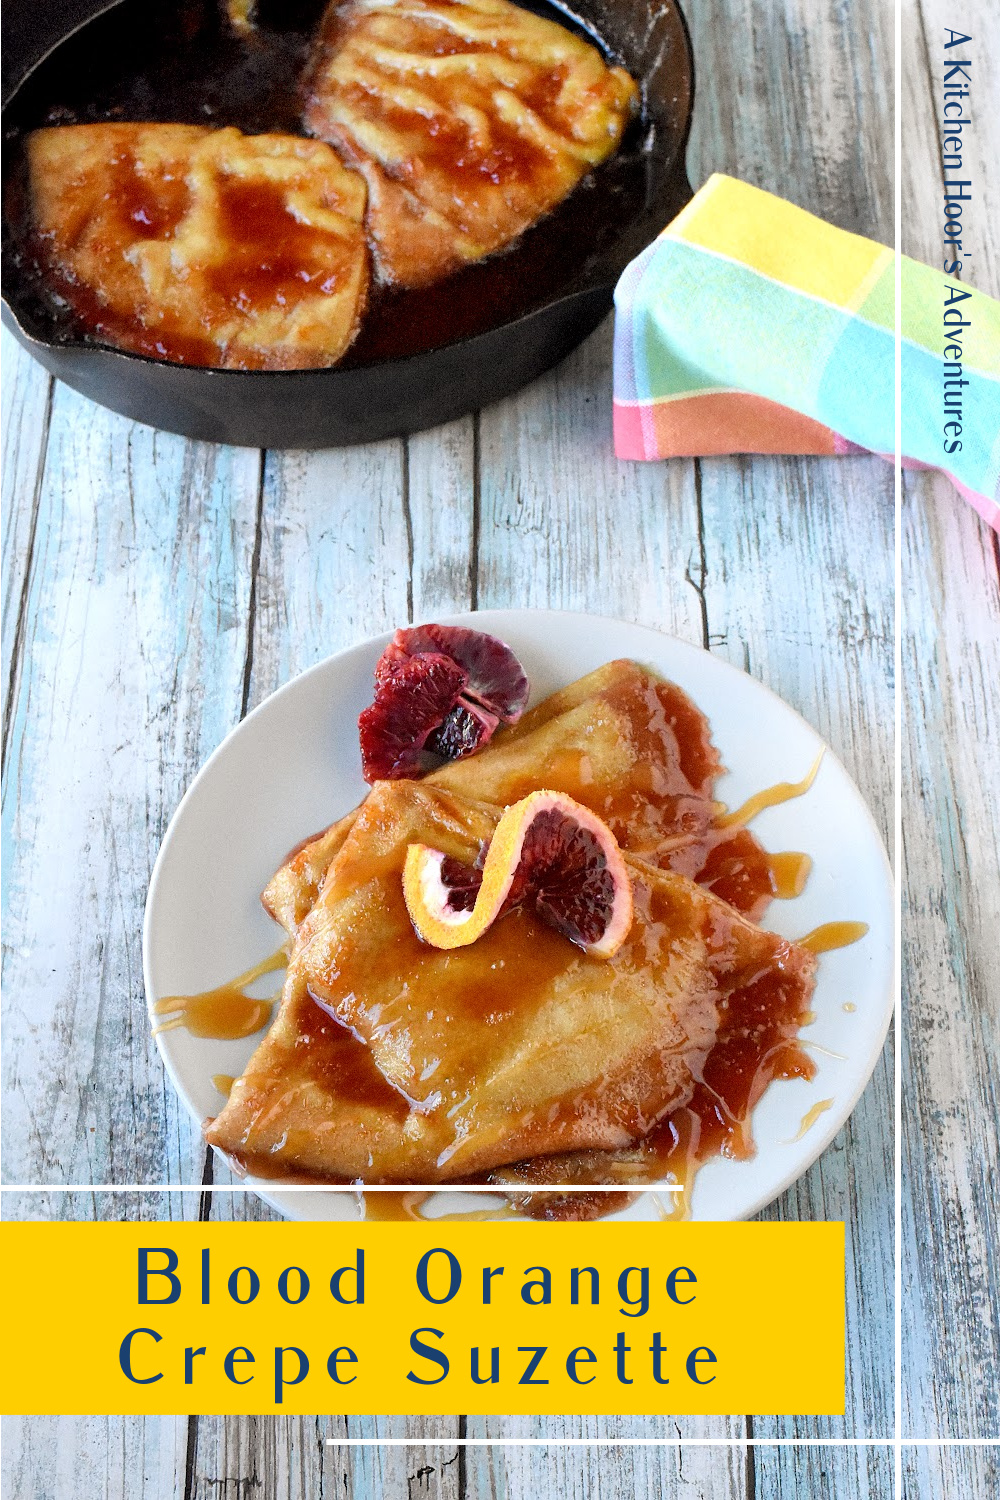 Satisfy your sweet tooth with the ultimate indulgence of Blood Orange Crêpe Suzette! A blood orange twist on a classic dessert that is sure to brighten up your Easter. #SpringSweetsWeek #dessertlover #foodie #CitrusCreations #SweetAndTangy #FruitDesserts #FrenchInspiredTreats #FlamingCrepes